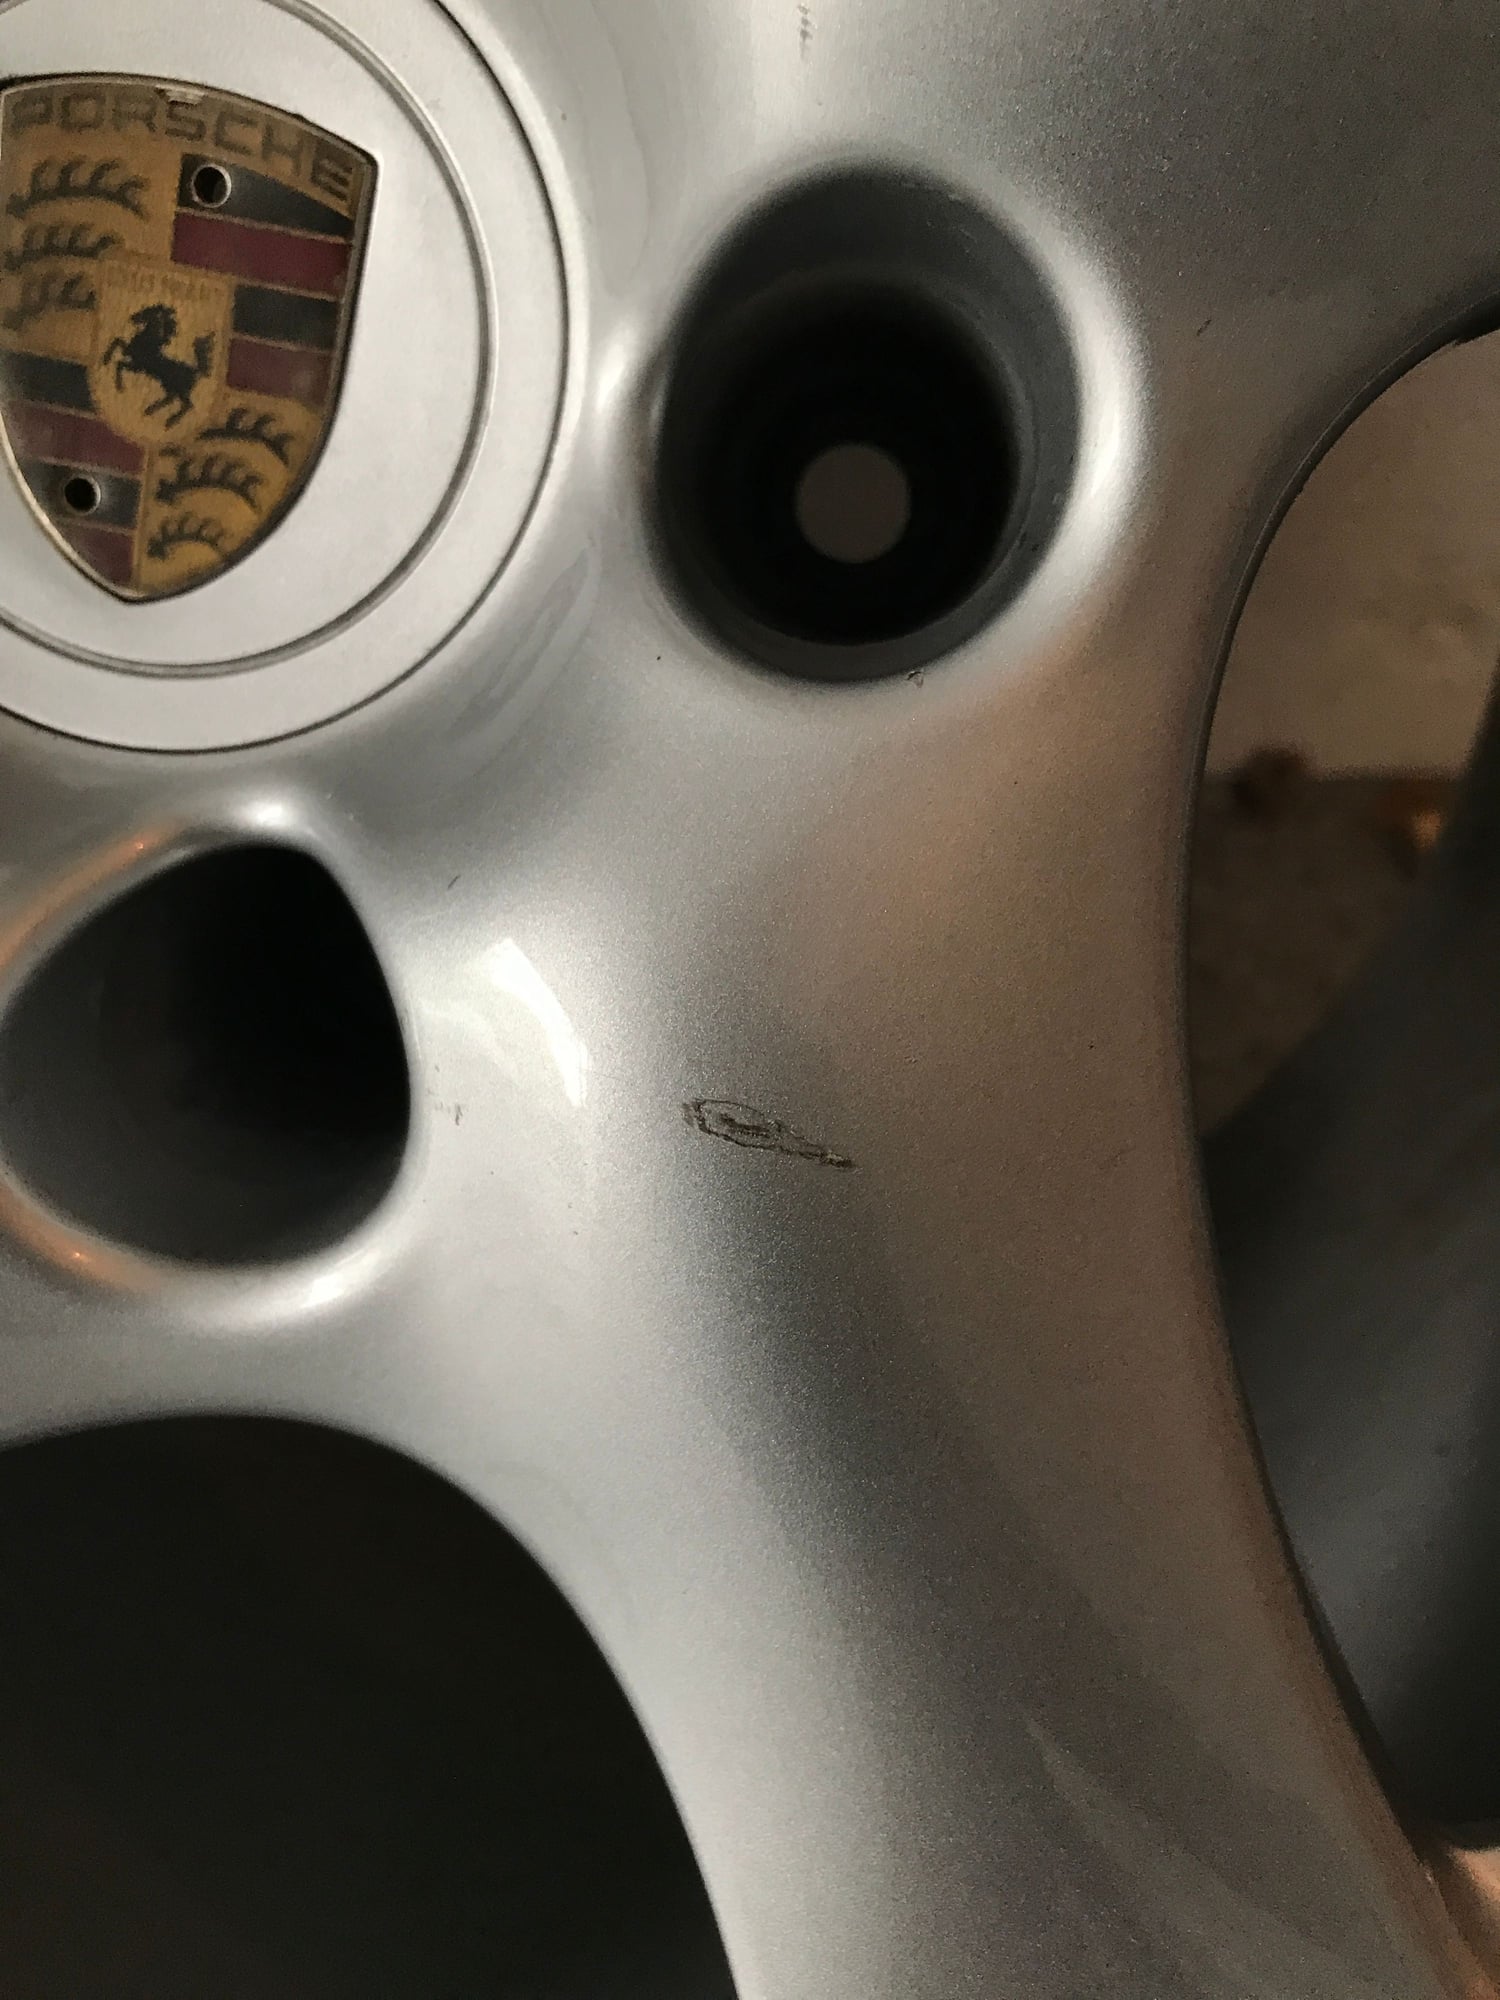 Wheels and Tires/Axles - 18” 996 GT2 Wheels - Used - 2000 to 2008 Porsche 911 - Mountainside, NJ 07092, United States